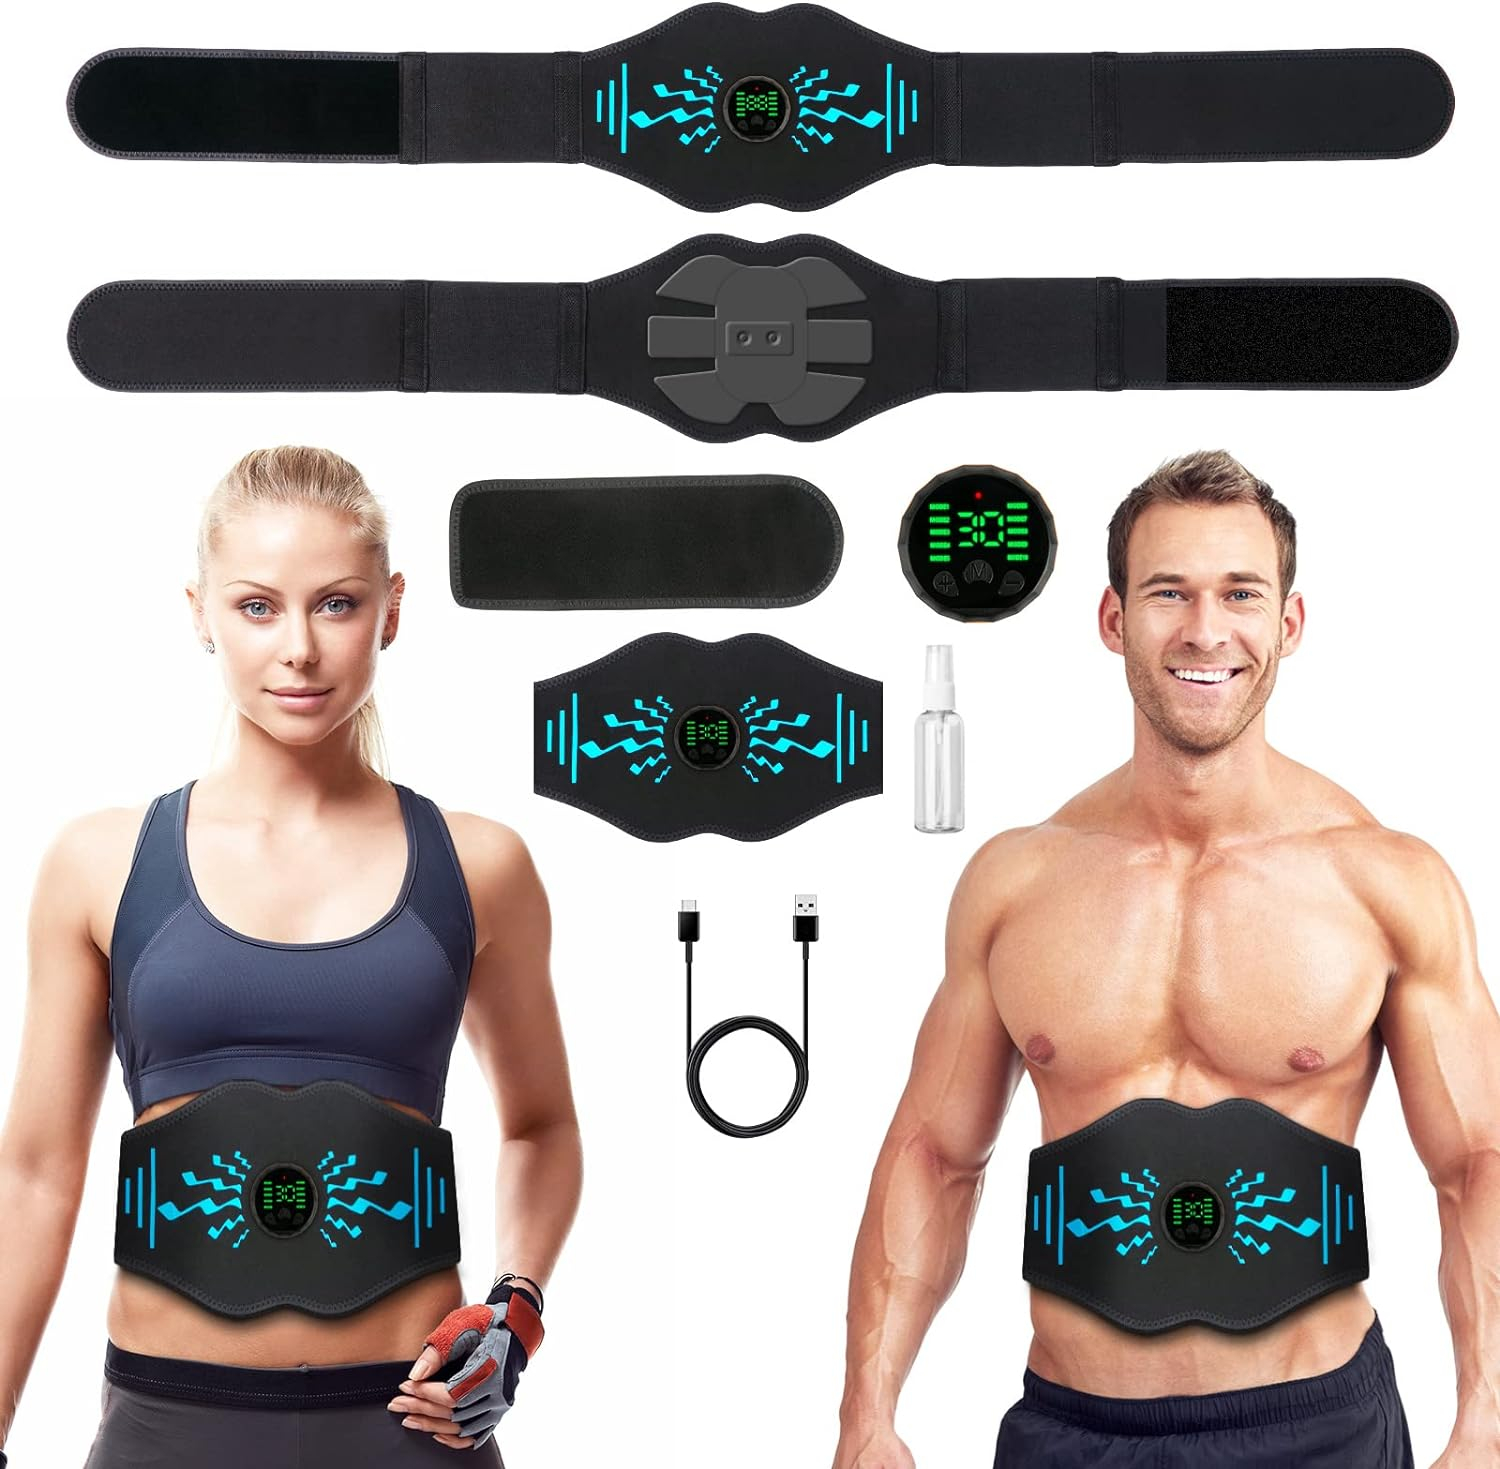 Yorsvueghe ABS Abdominal Muscle Exercise Equipmentr, Ab Sport Exercise Belt, Abdominal Tone Trainer Home Fitness Equipment for Men and Women Black